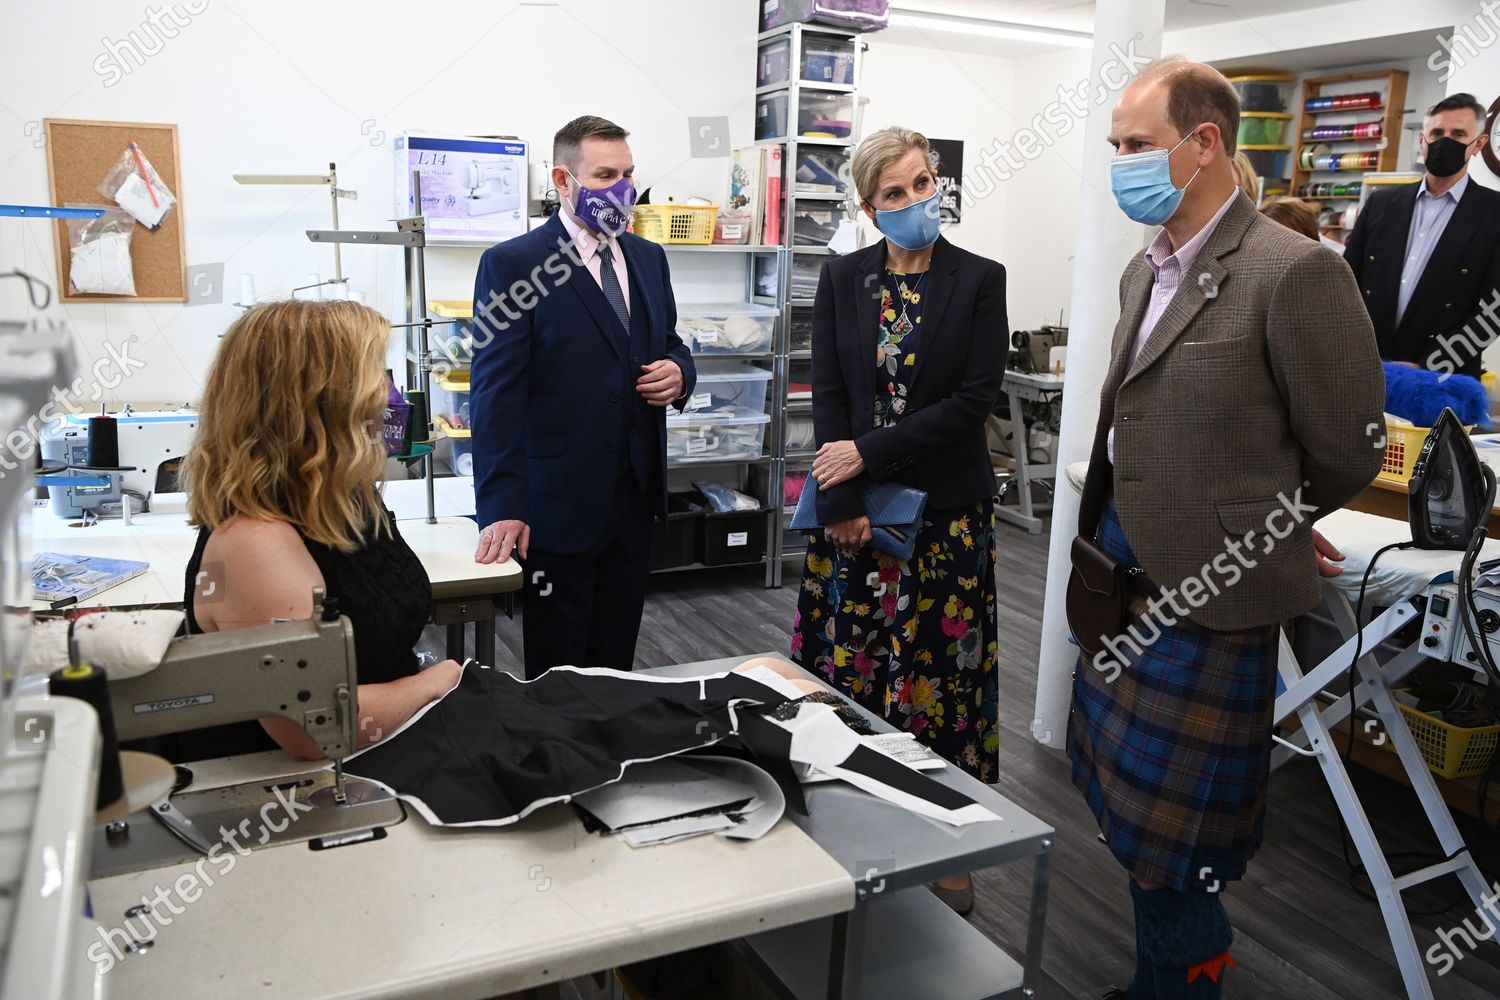 CASA REAL BRITÁNICA - Página 75 Prince-edward-and-sophie-countess-of-wessex-visit-to-utopia-costumes-forfar-scotland-uk-shutterstock-editorial-12172309c